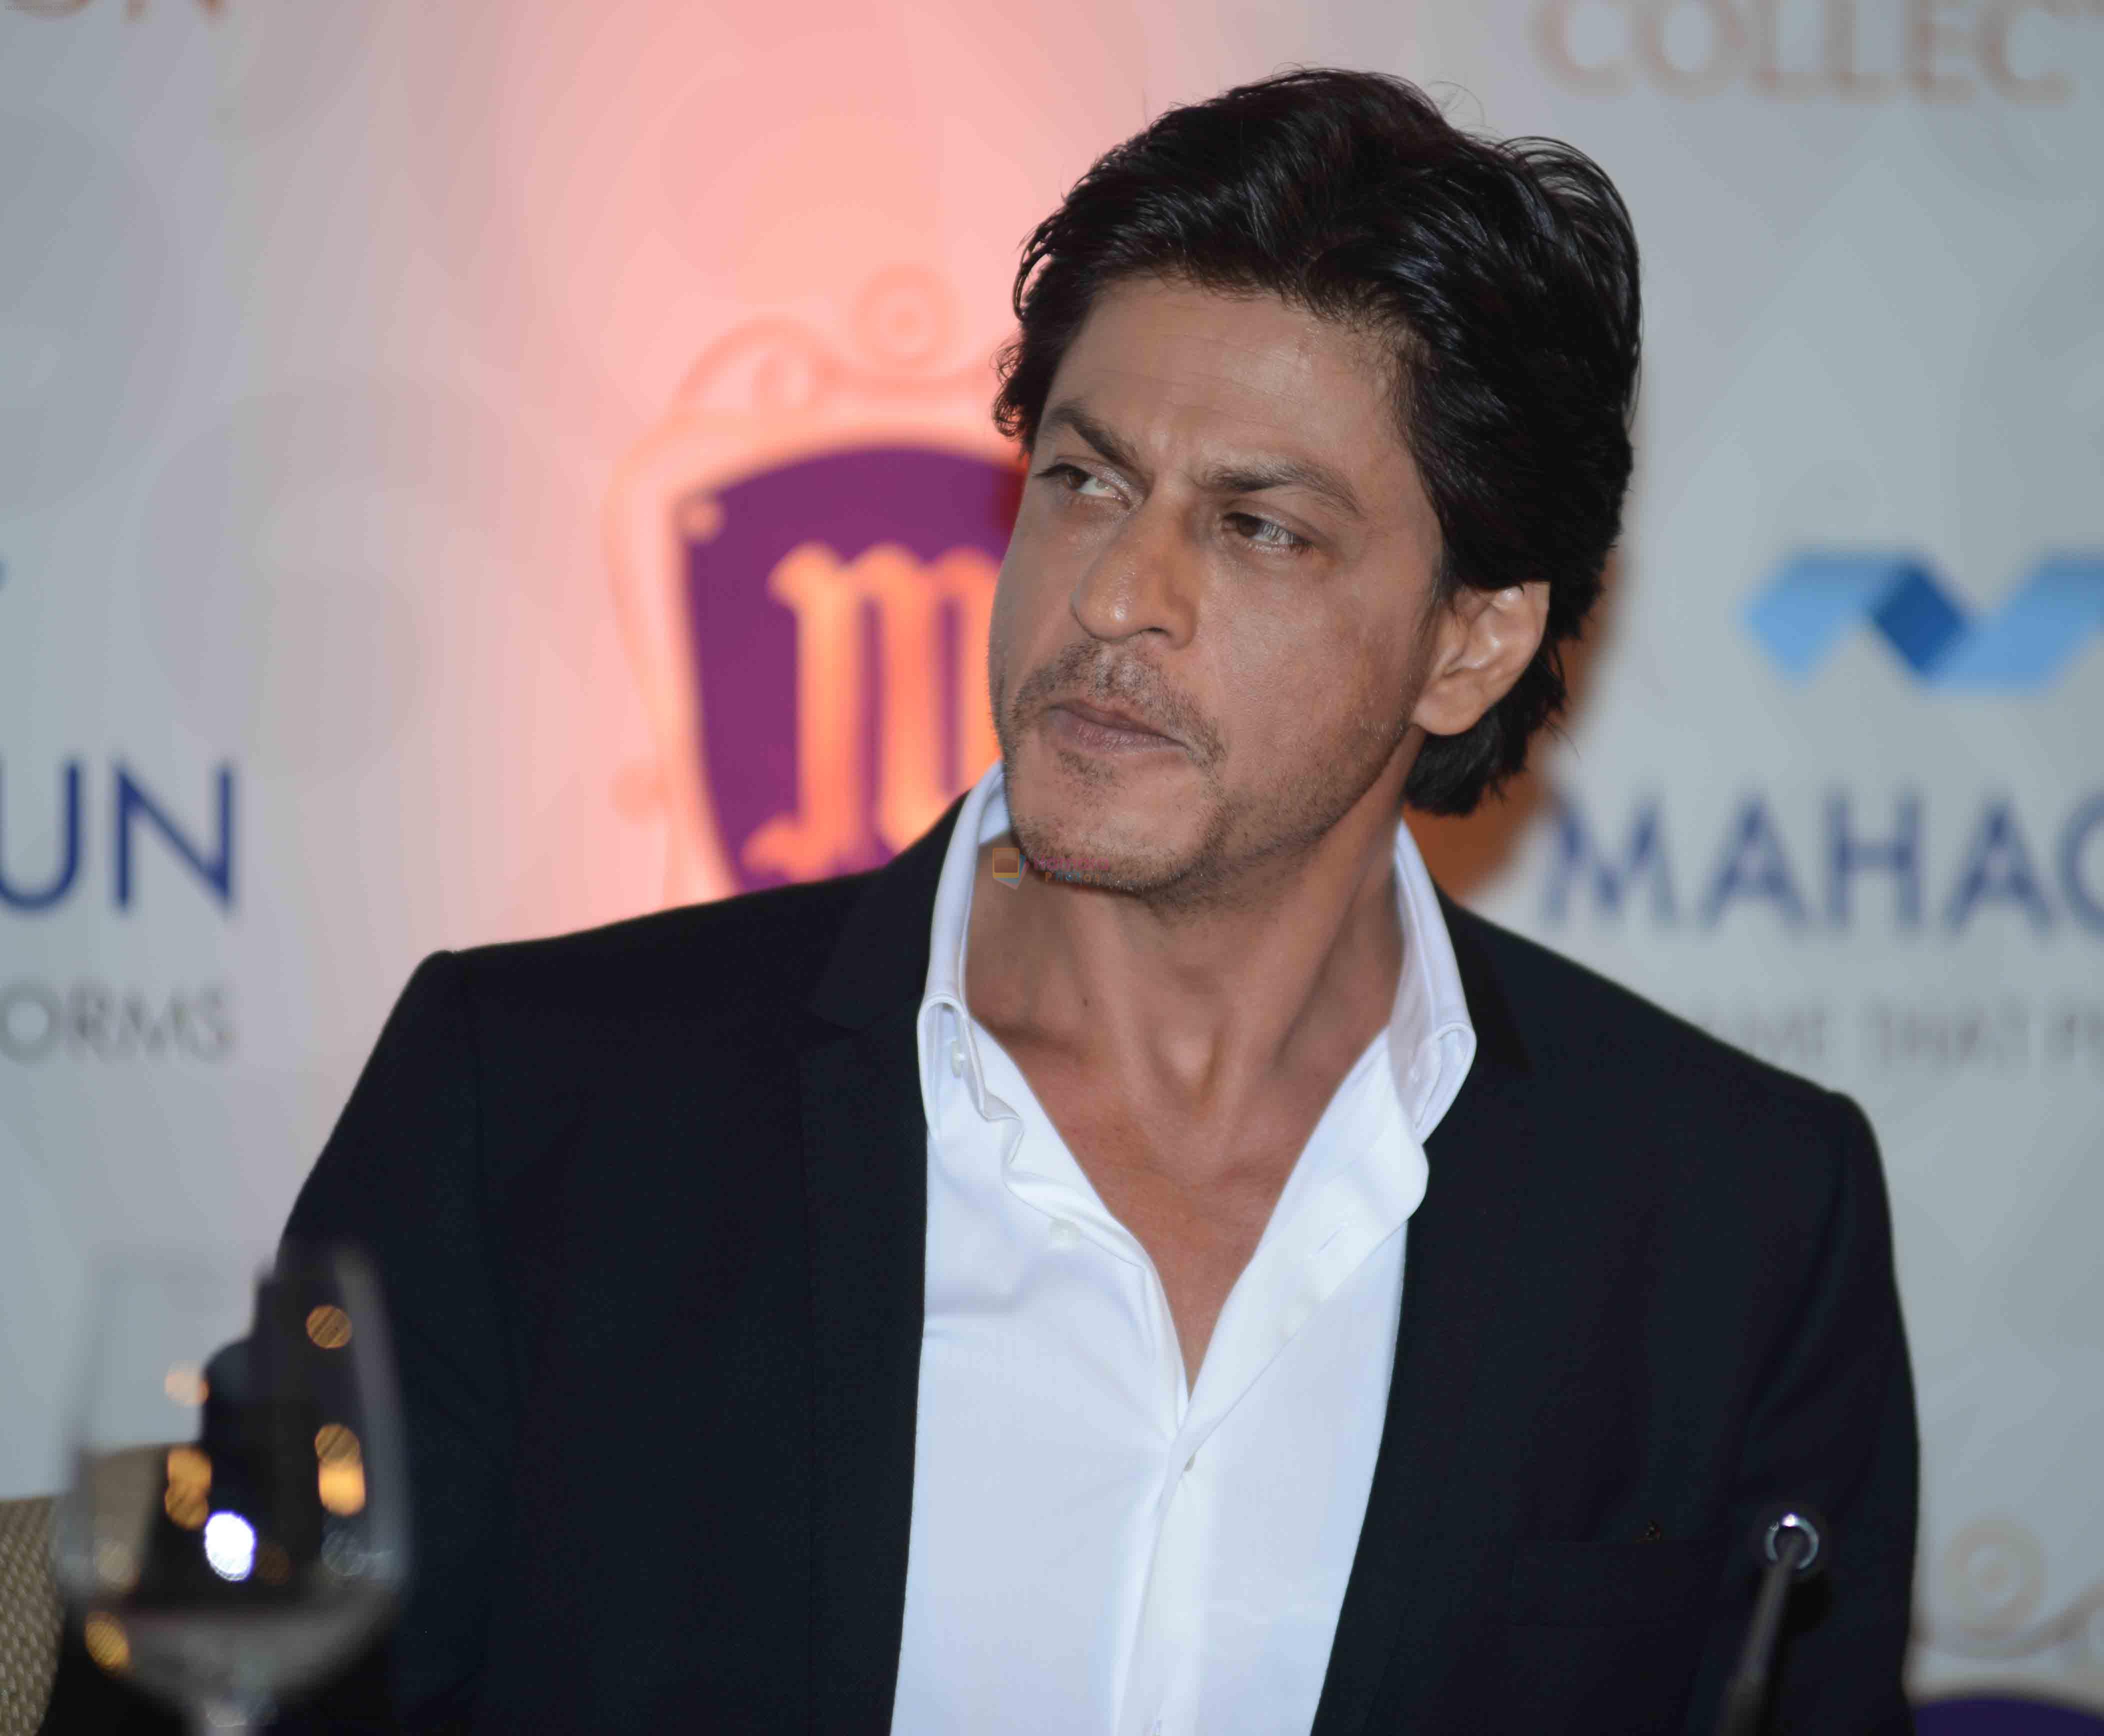 Shah Rukh Khan during the launch of Mahagun's luxurious properties The M Collection in New Delhi on April 11, 2015